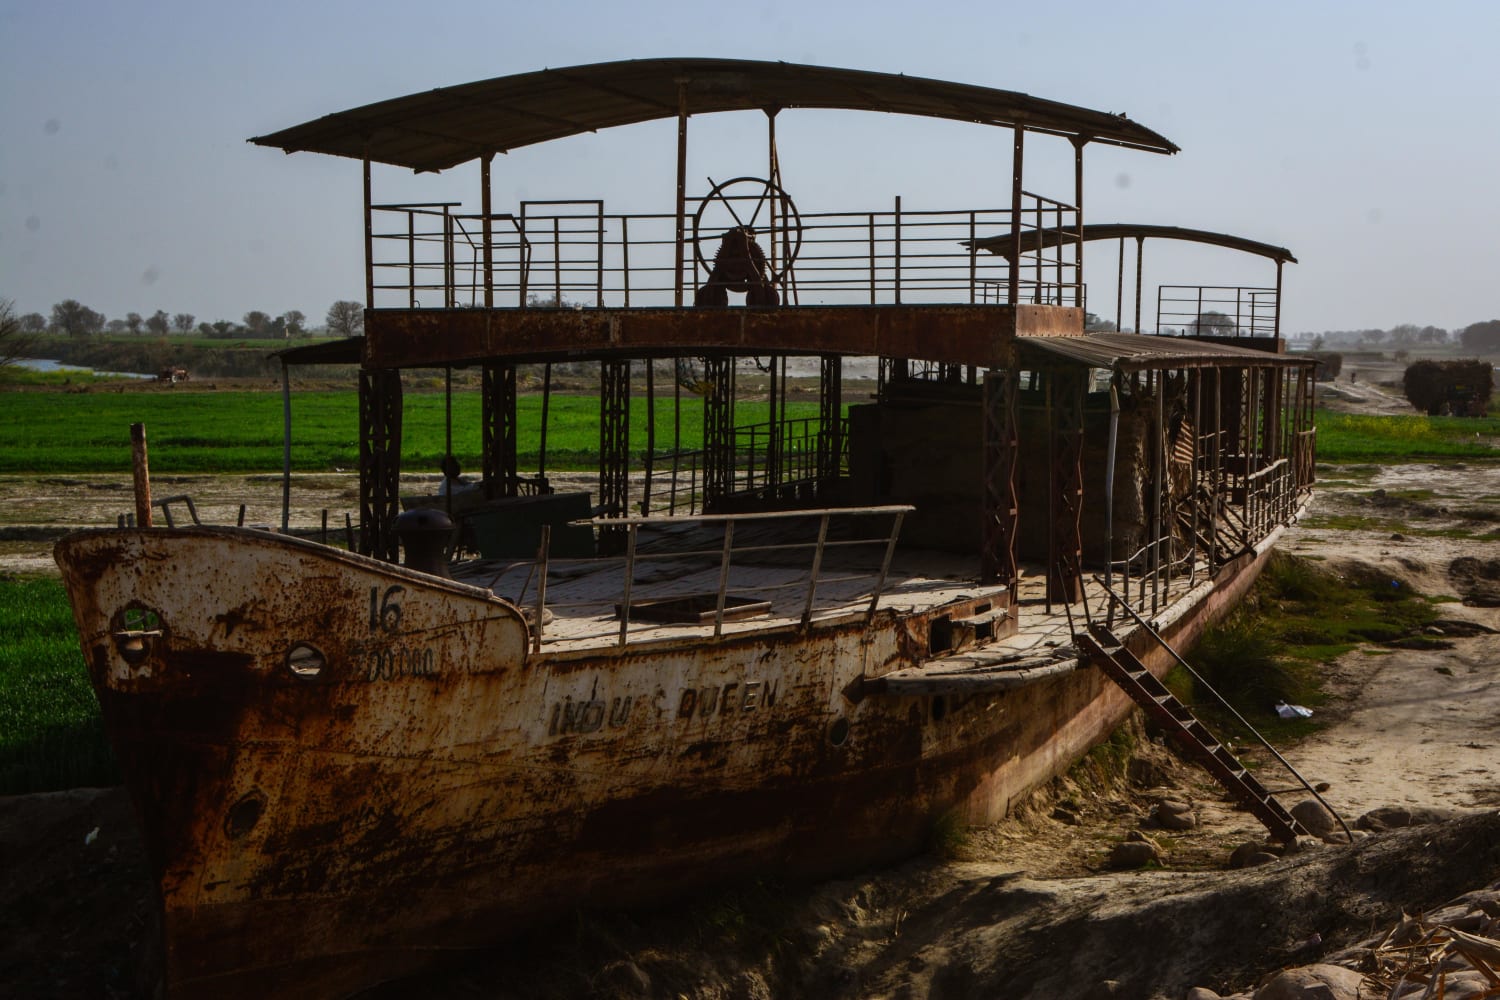 The Indus Queen, once a royal pleasure steamer, left abandoned in rural Punjab, Pakistan.